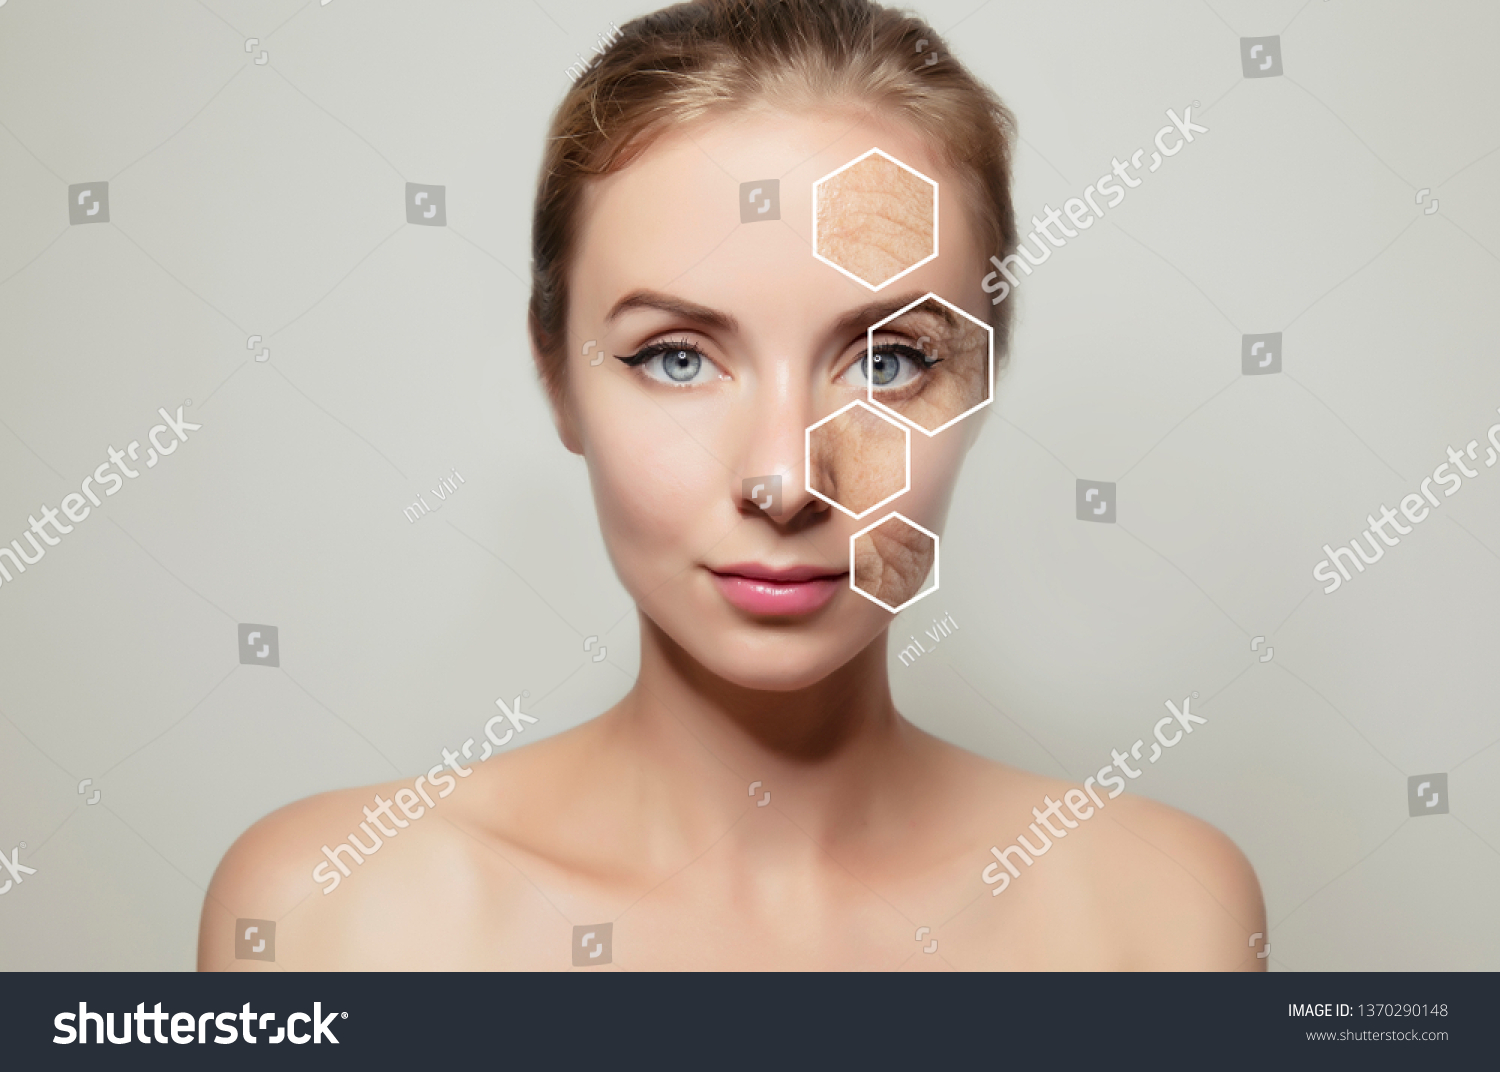 woman face portrait with graphic elements showing old problem skin #1370290148